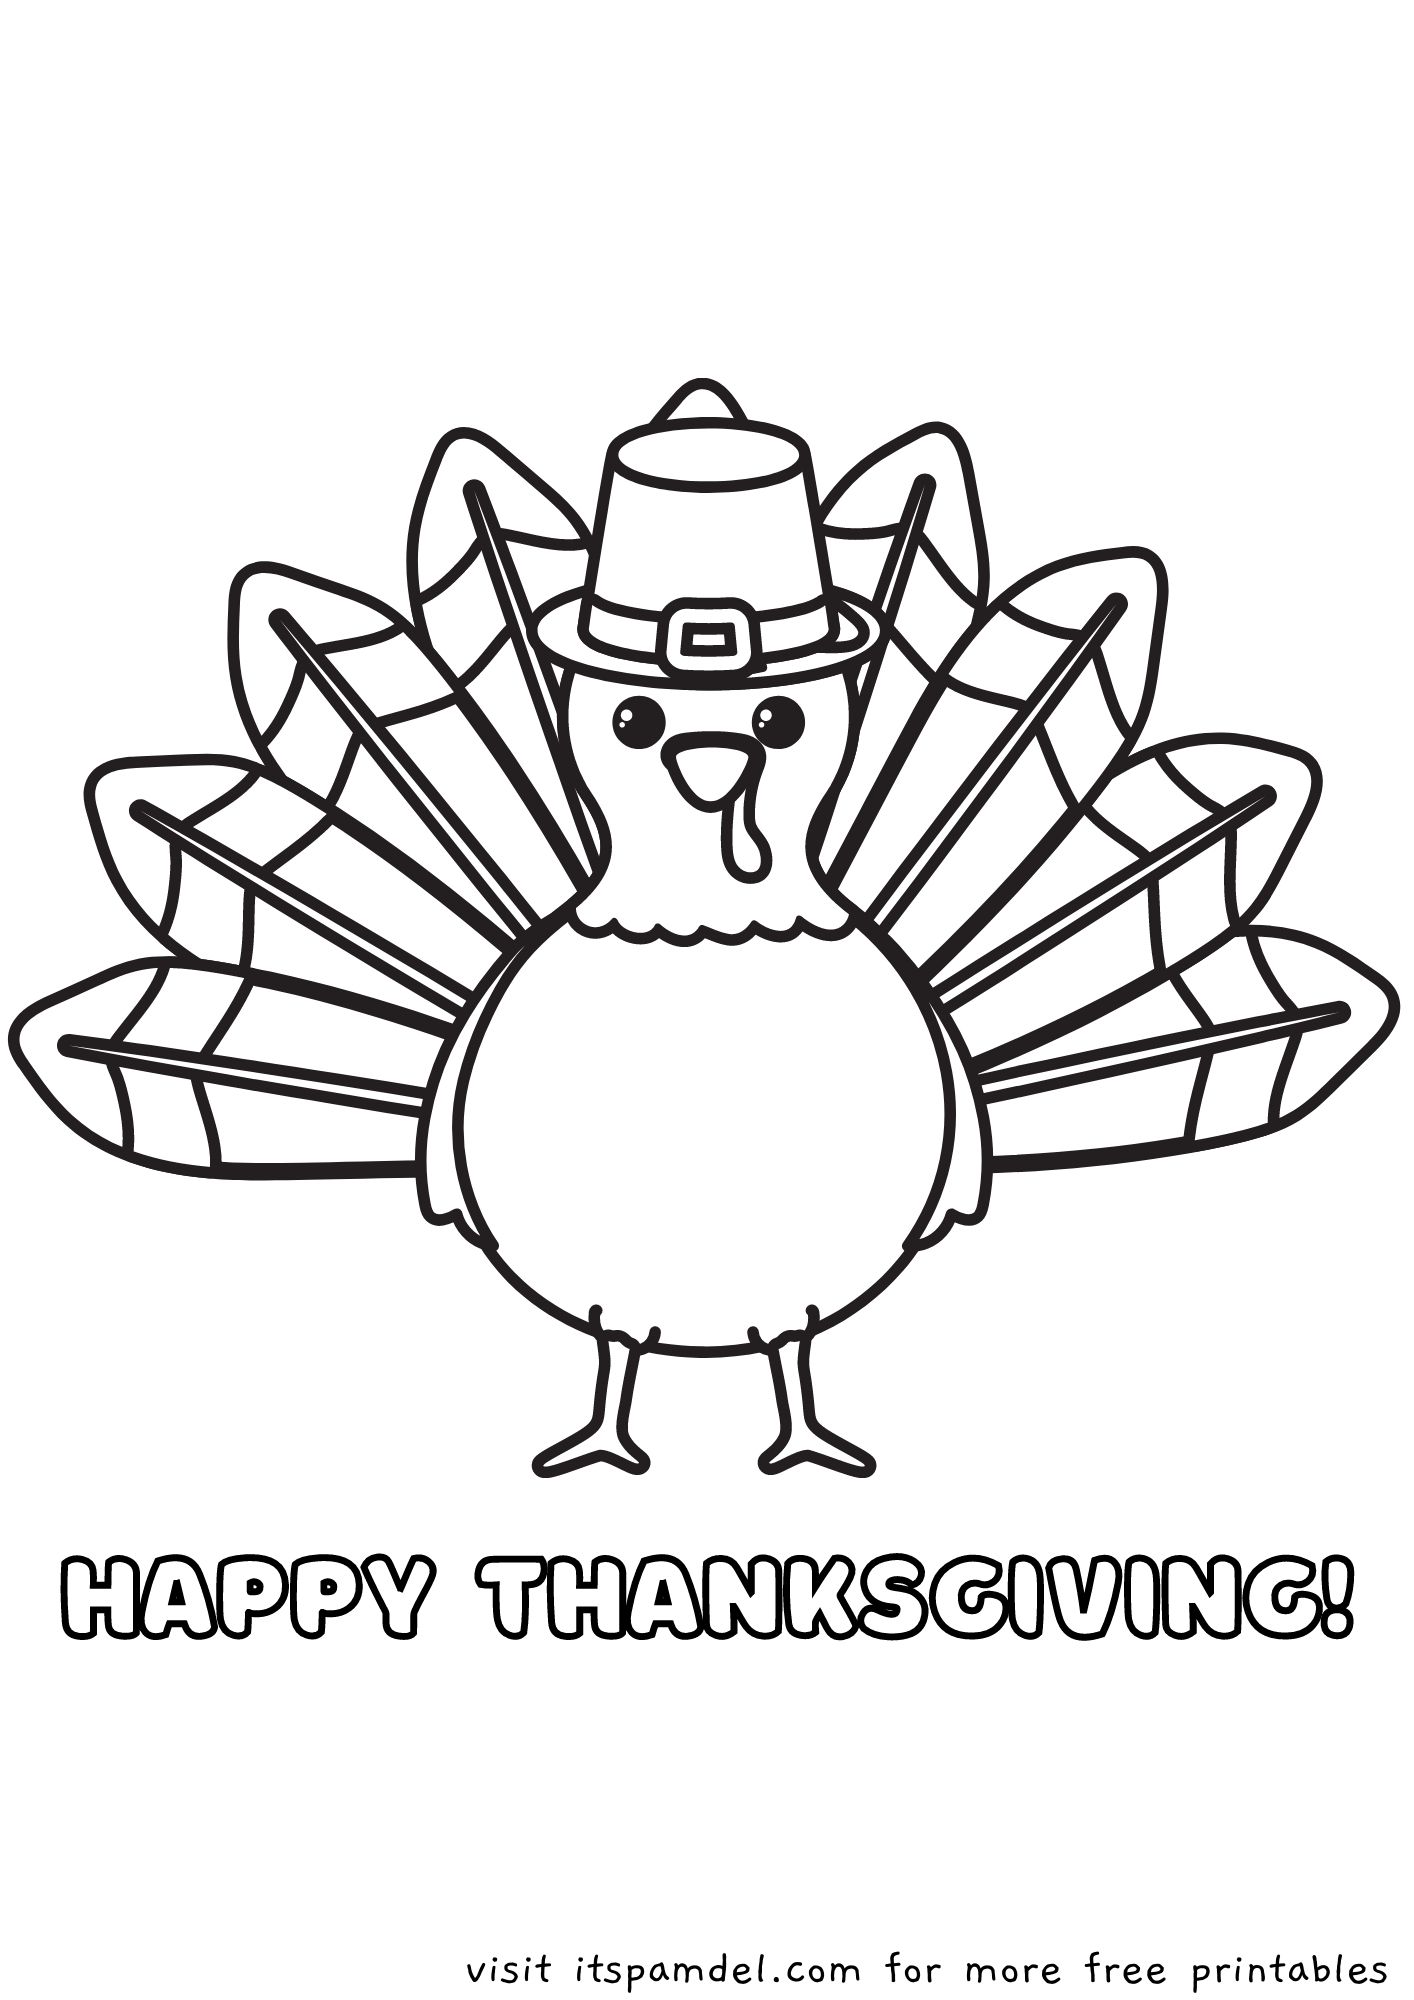 Free Printable Thanksgiving Coloring Pages for Kids   It's Pam Del